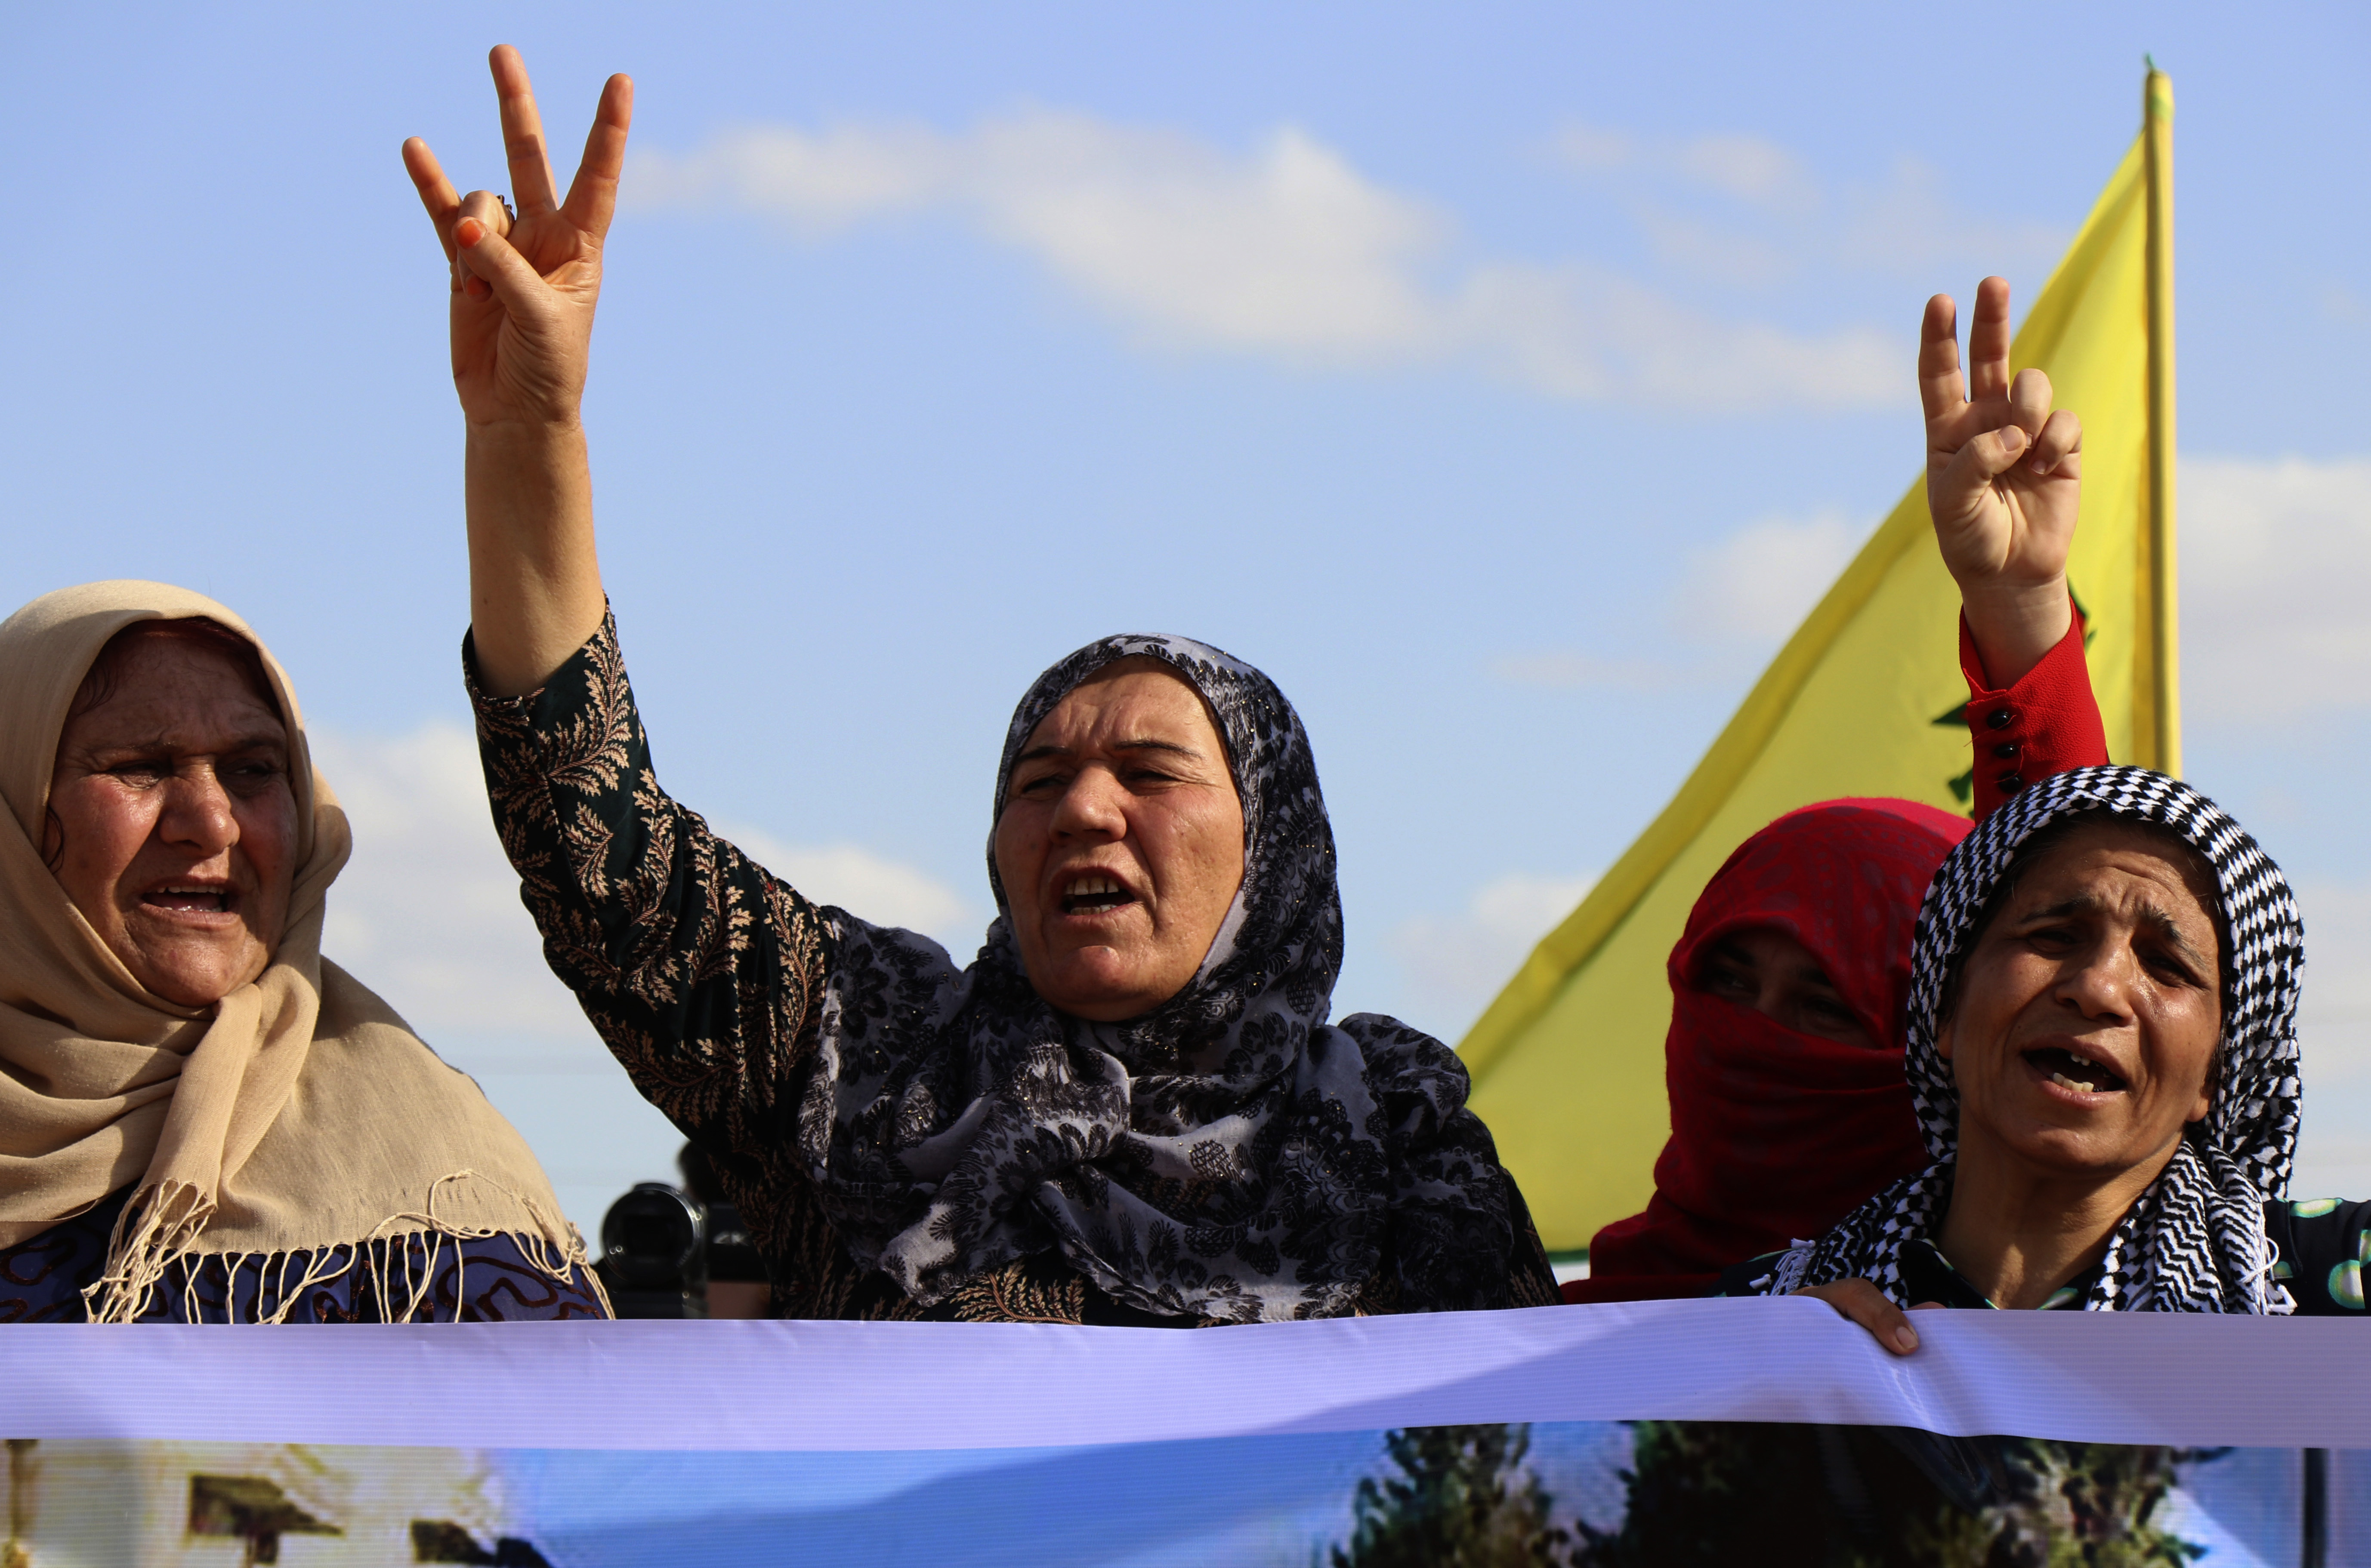 Kurdish women flash victory signs and shout slogans as they protest against possible Turkish military operation on their areas, at the Syrian-Turkish border, in Ras al-Ayn, Syria, Monday, Oct. 7, 2019. Syria's Kurds accused the U.S. of turning its back on its allies and risking gains made in the fight against the Islamic State group as American troops began pulling back on Monday from positions in northeastern Syria ahead of an expected Turkish assault. (AP Photo)